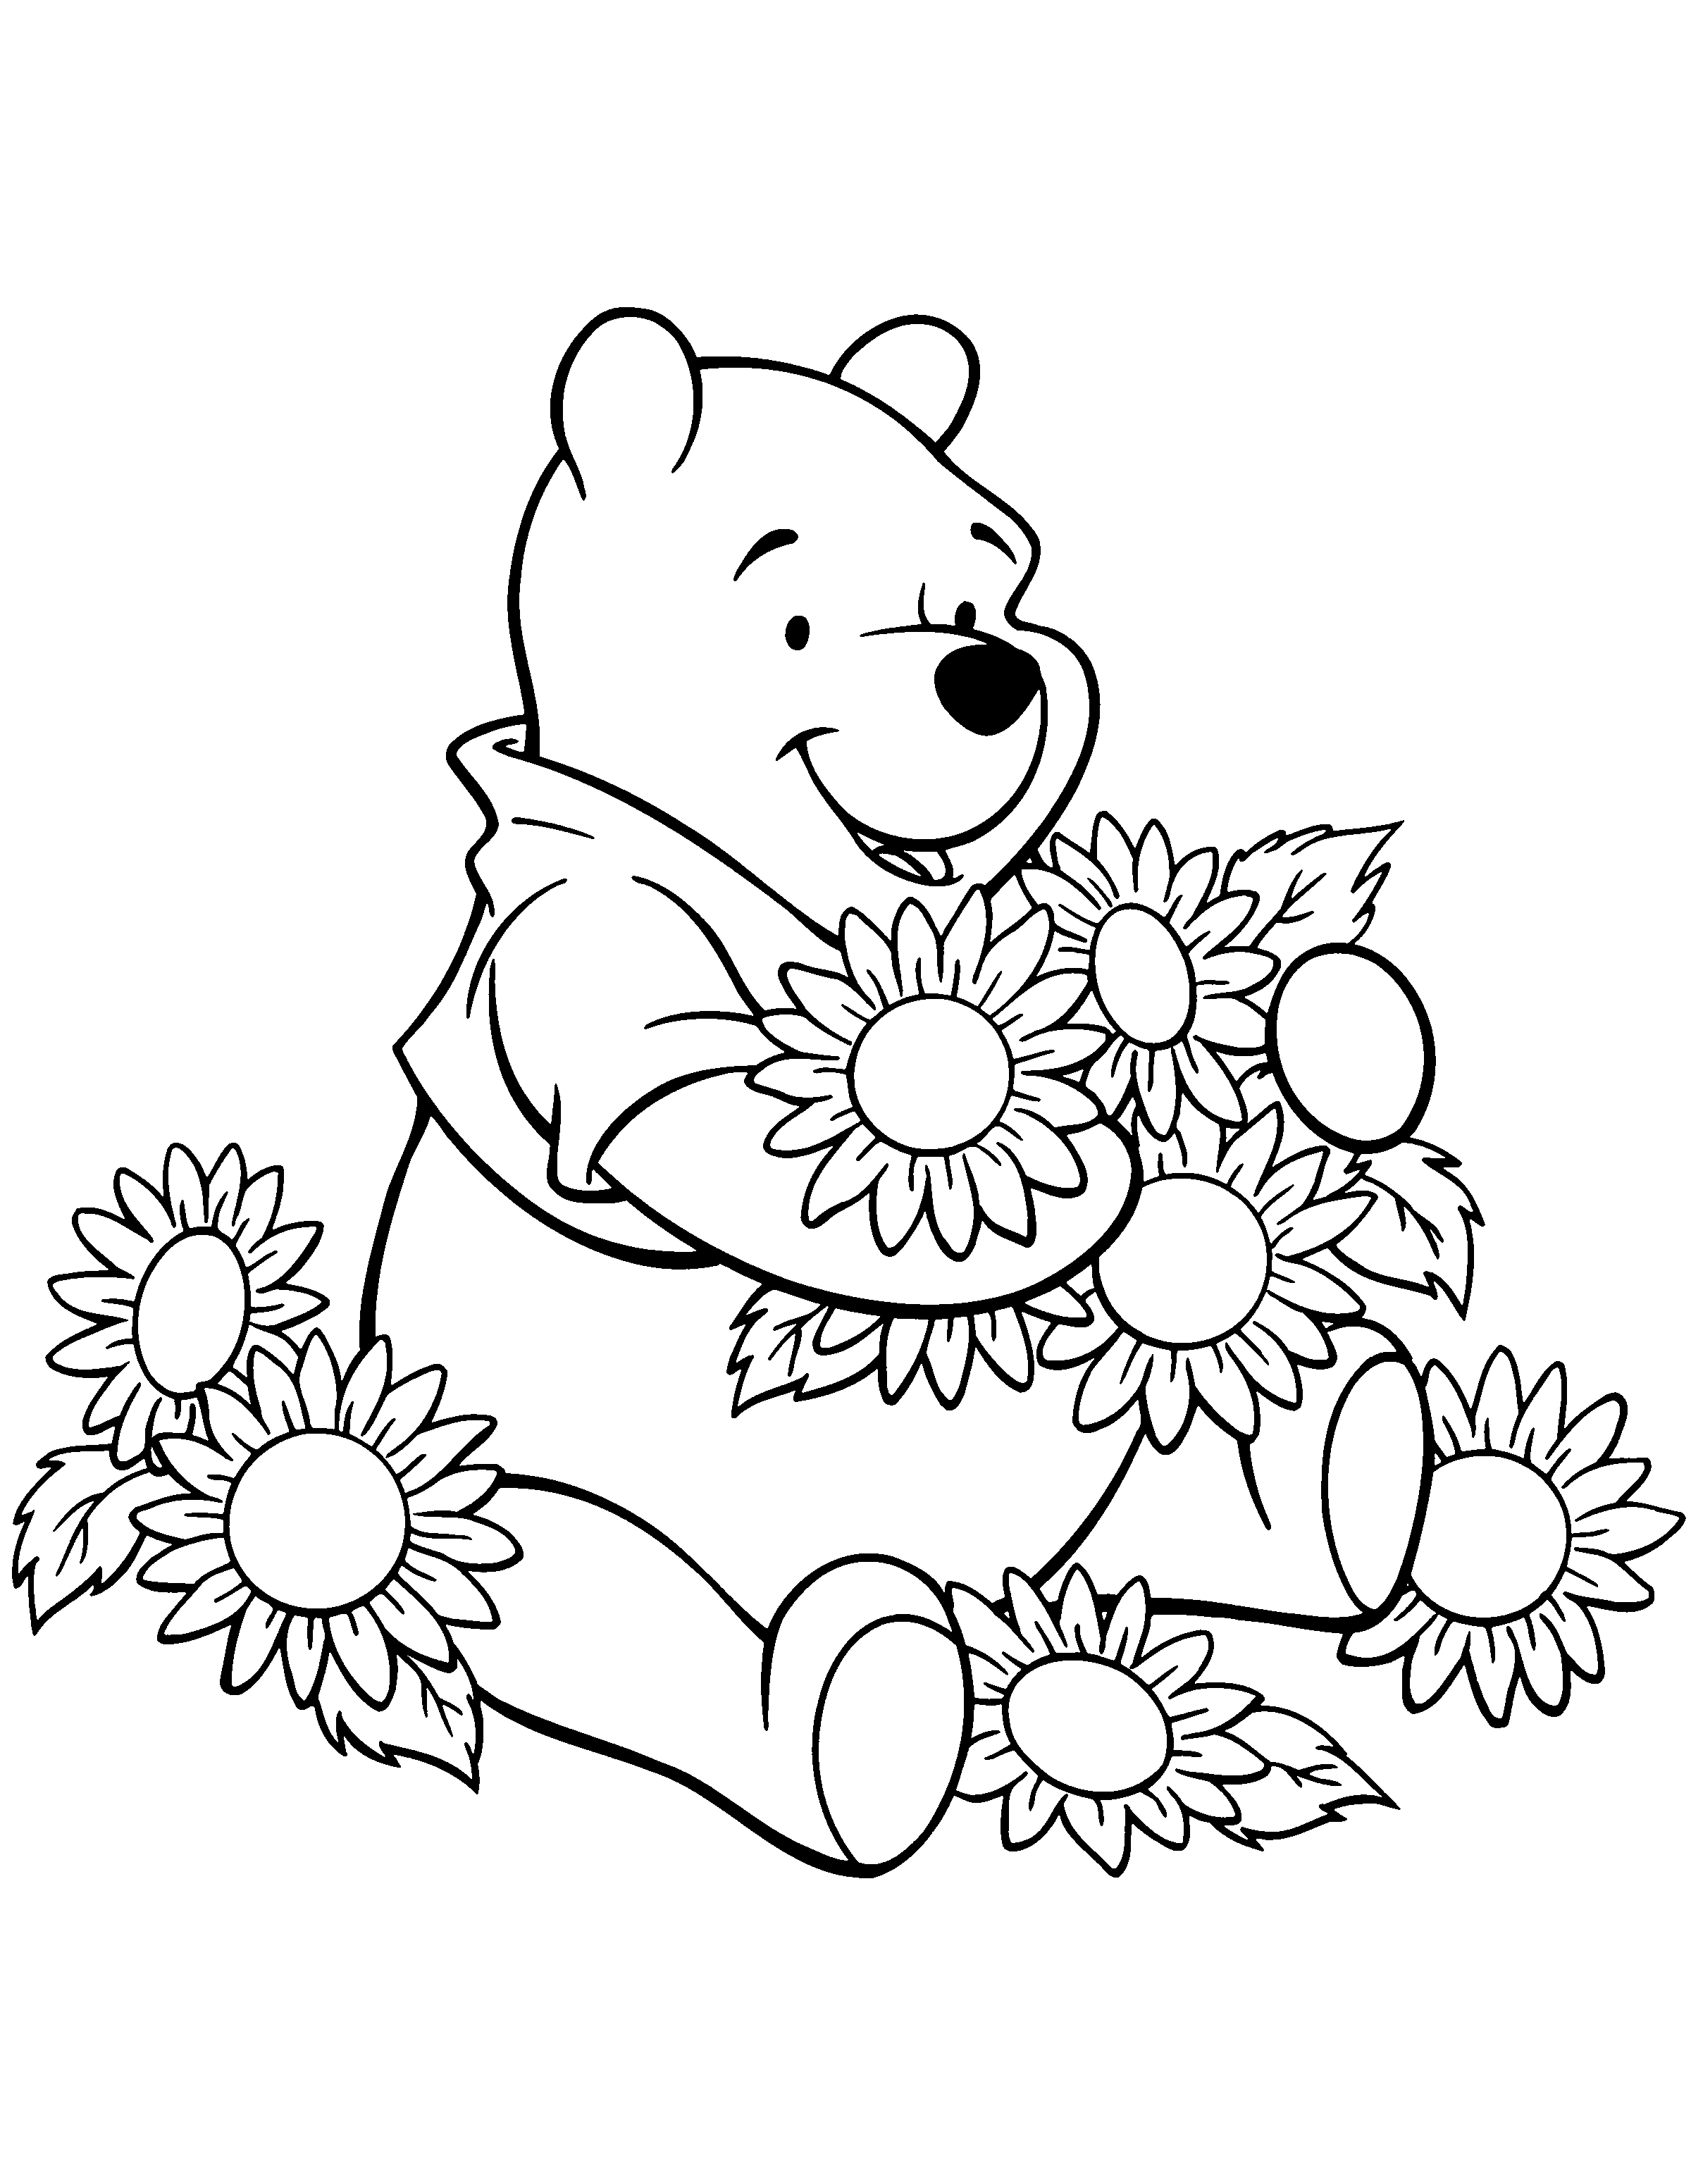 Coloring Page - Winnie the pooh coloring pages 117